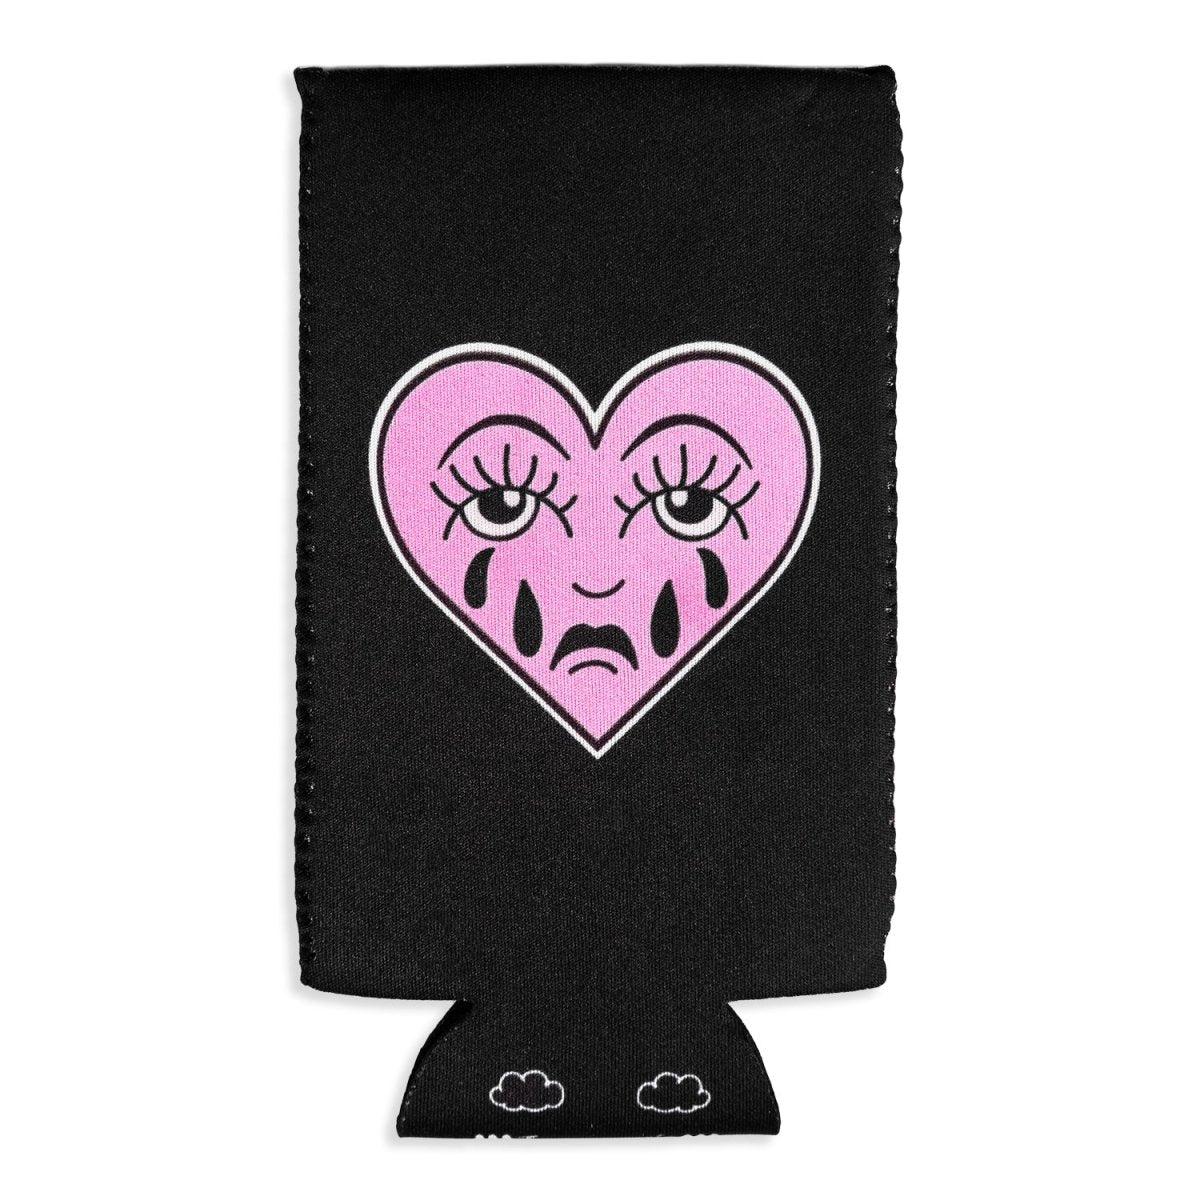 Too Fast | A Shop of Things | Crying Heart Tall Can Koozie